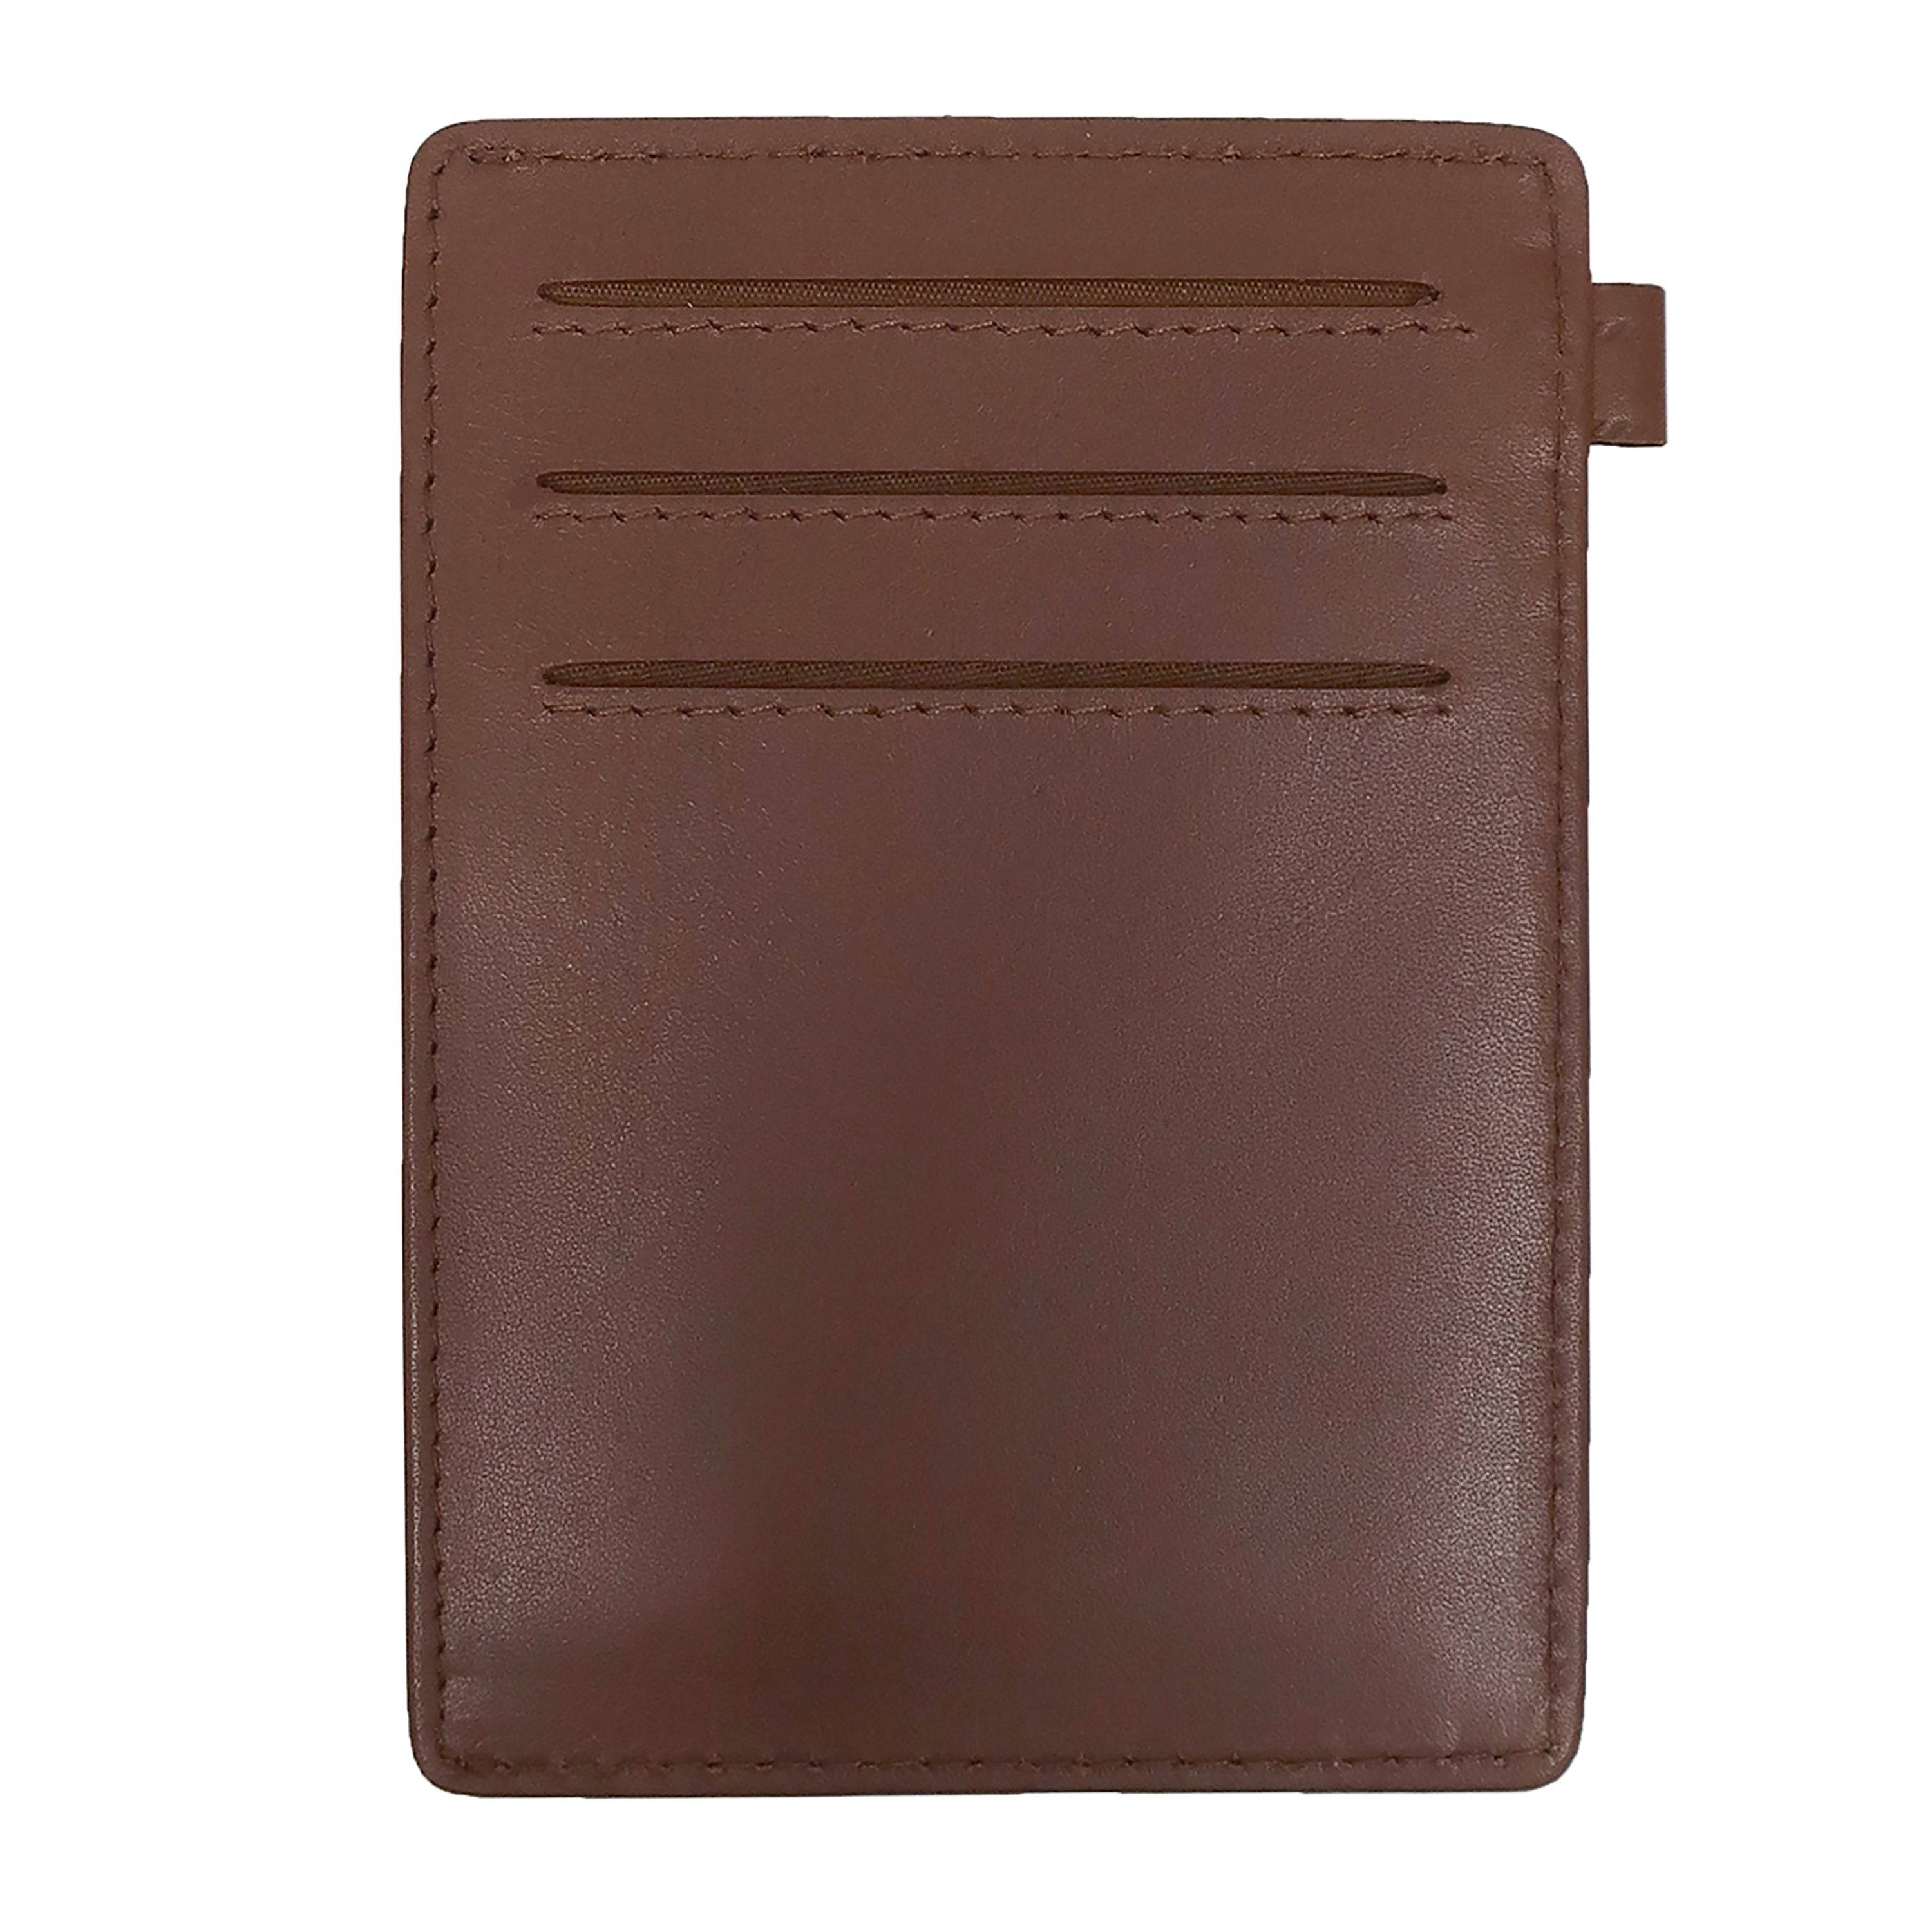 a brown leather wallet with a card holder